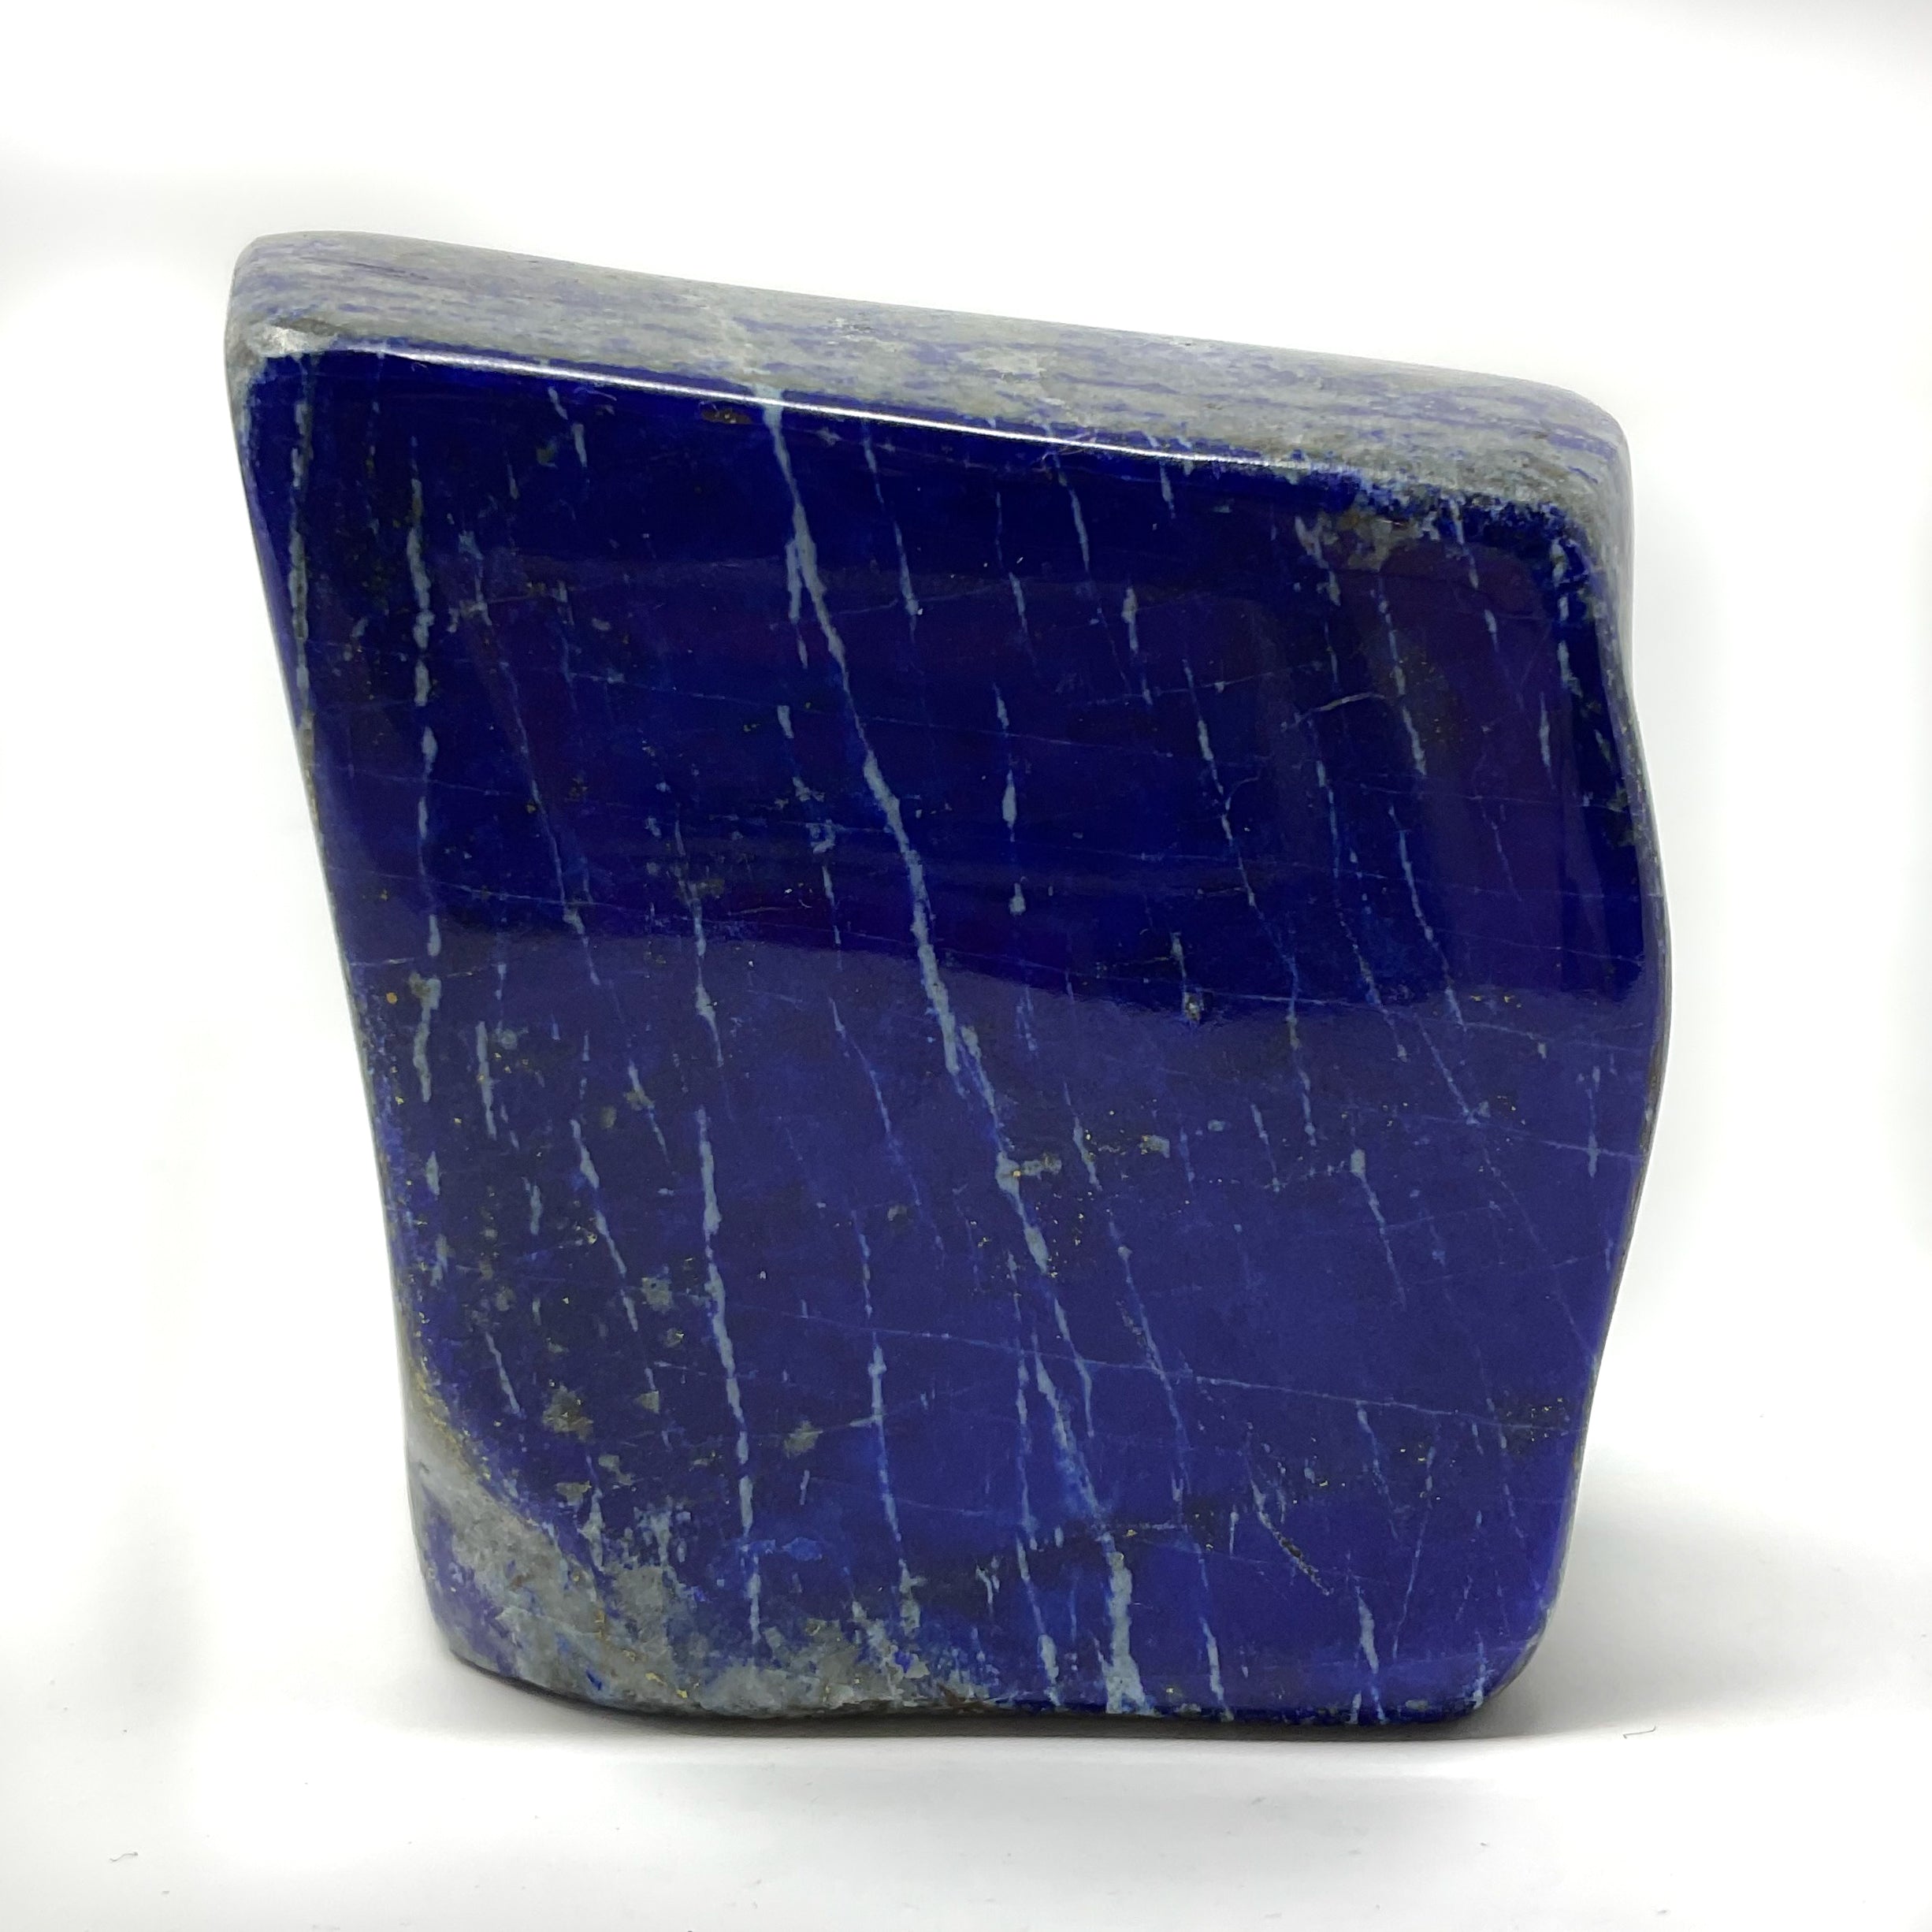 Polished Lapis Lazuli from Afghanistan